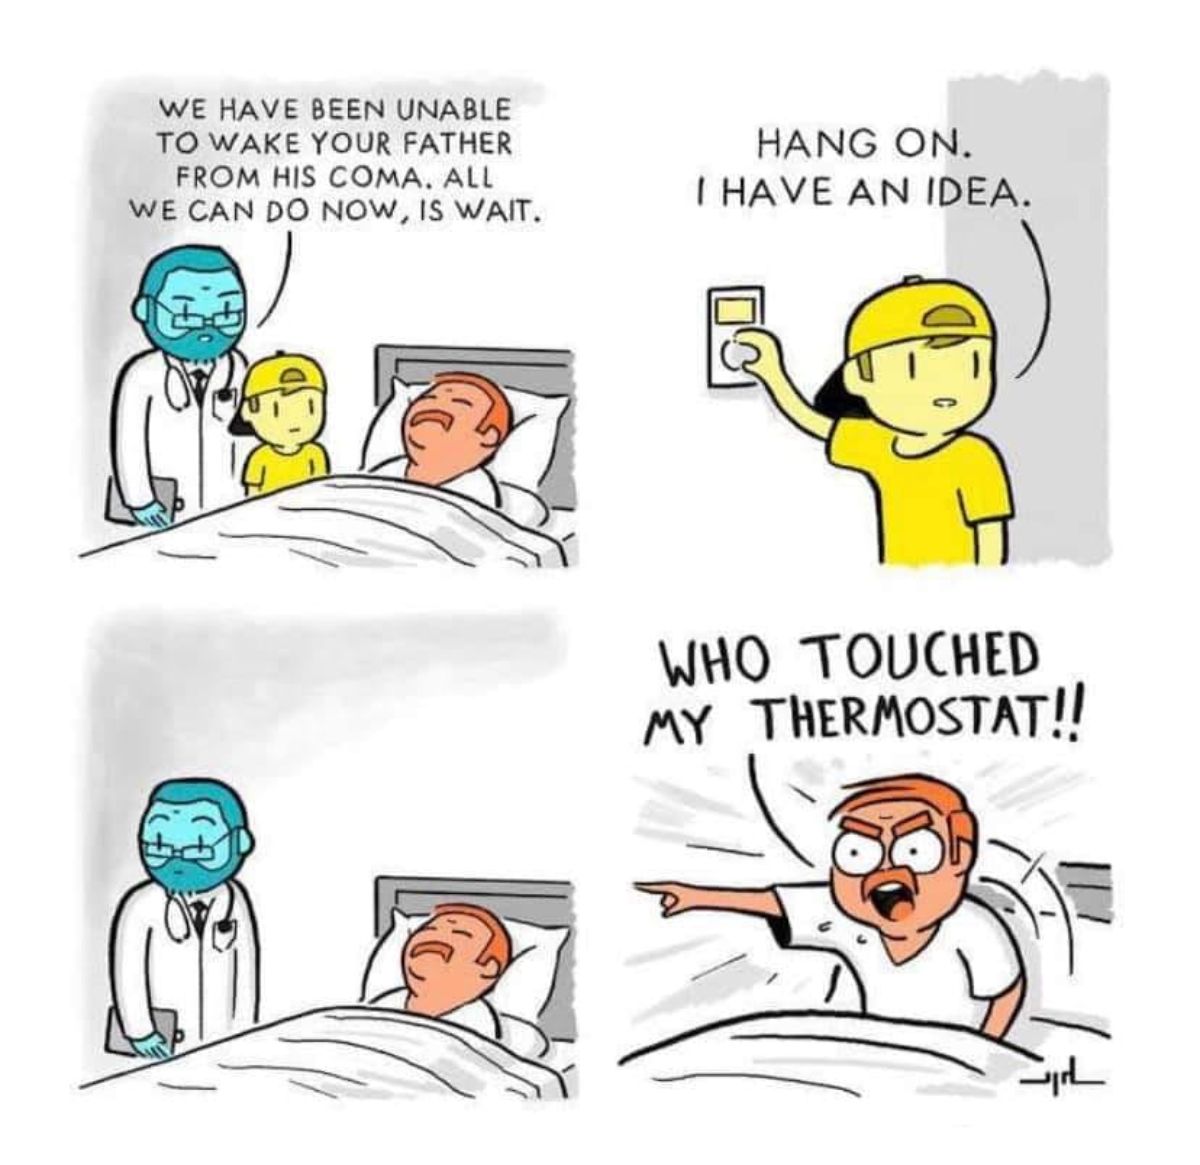 Meme - We Have Been Unable To Wake Your Father From His Coma. All We Can Do Now, Is Wait. Hang On. I Have An Idea. Who Touched My Thermostat!!